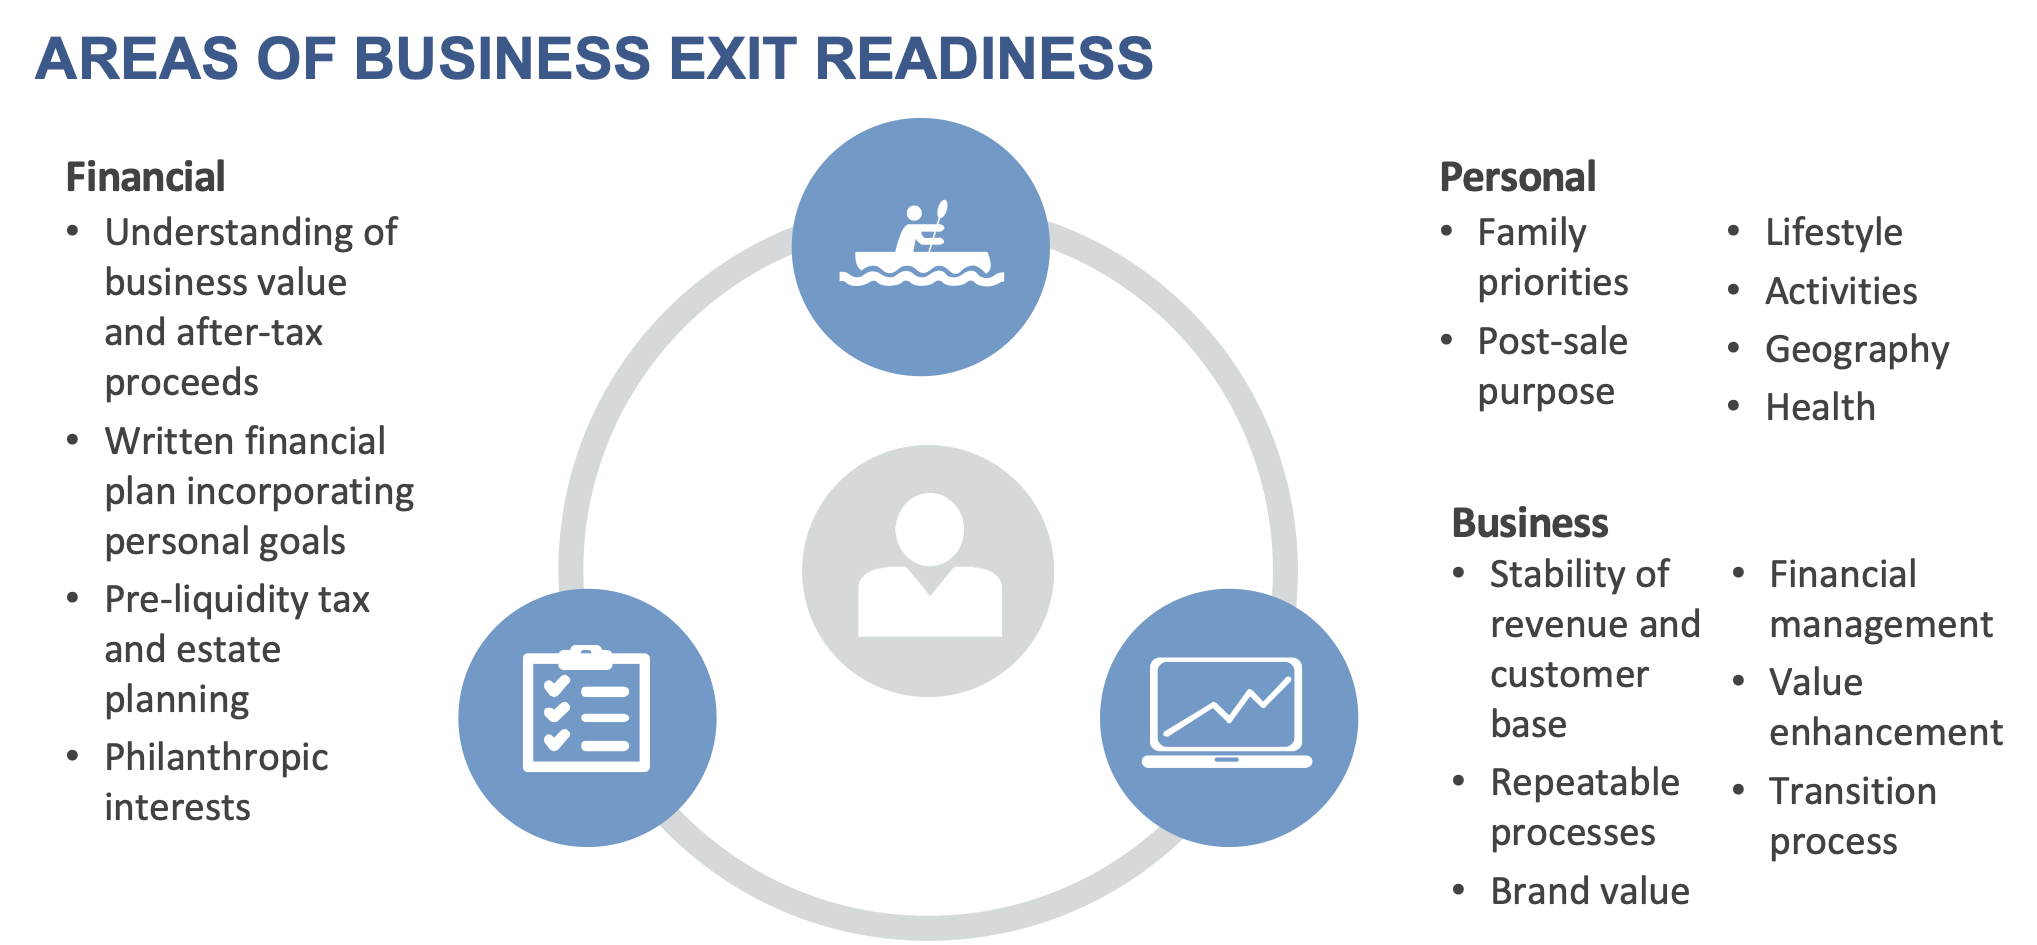 Exhibit A—Areas of Business Exit Readiness